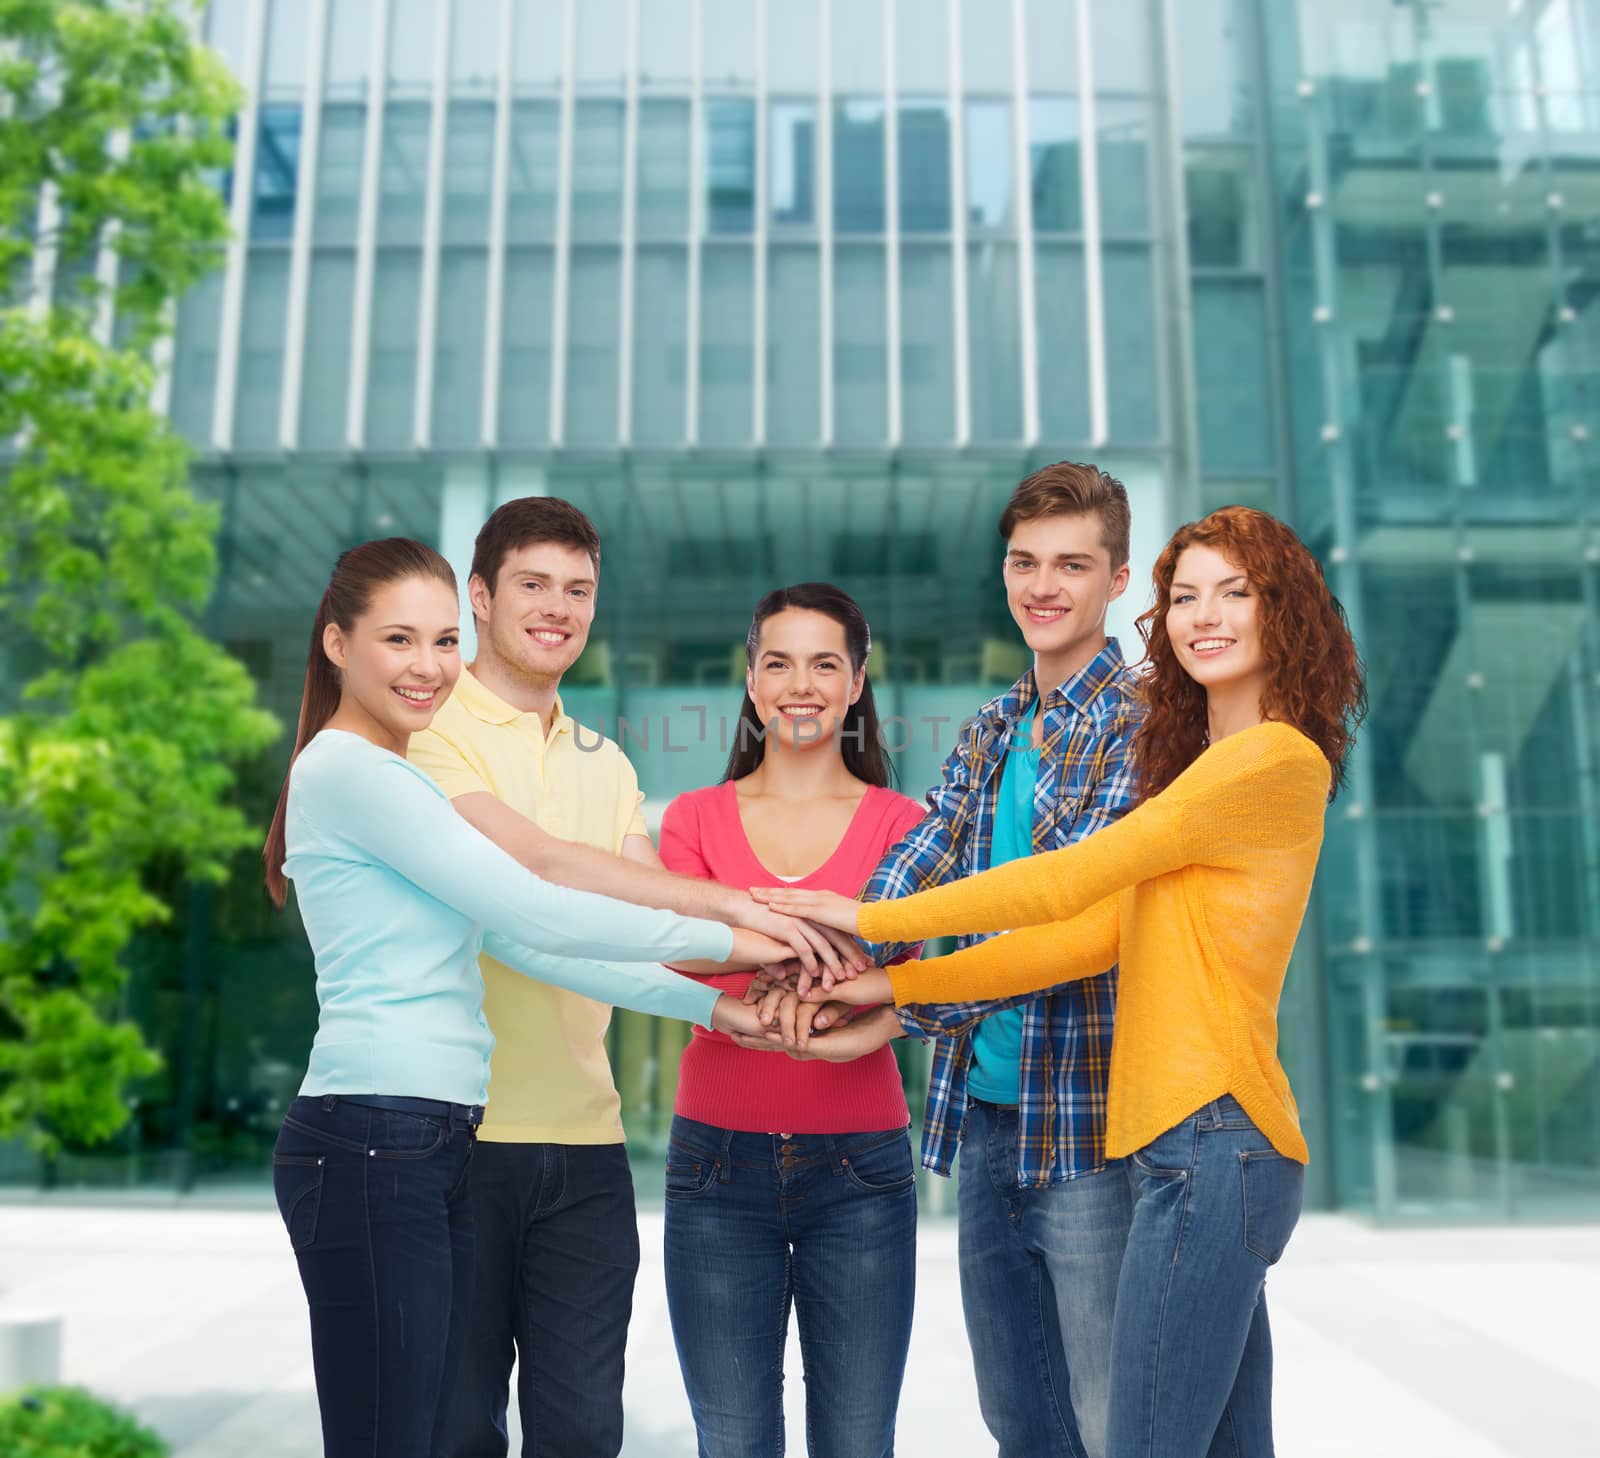 friendship, education, business, gesture and people concept - group of smiling teenagers with hands on top of each other over campus background